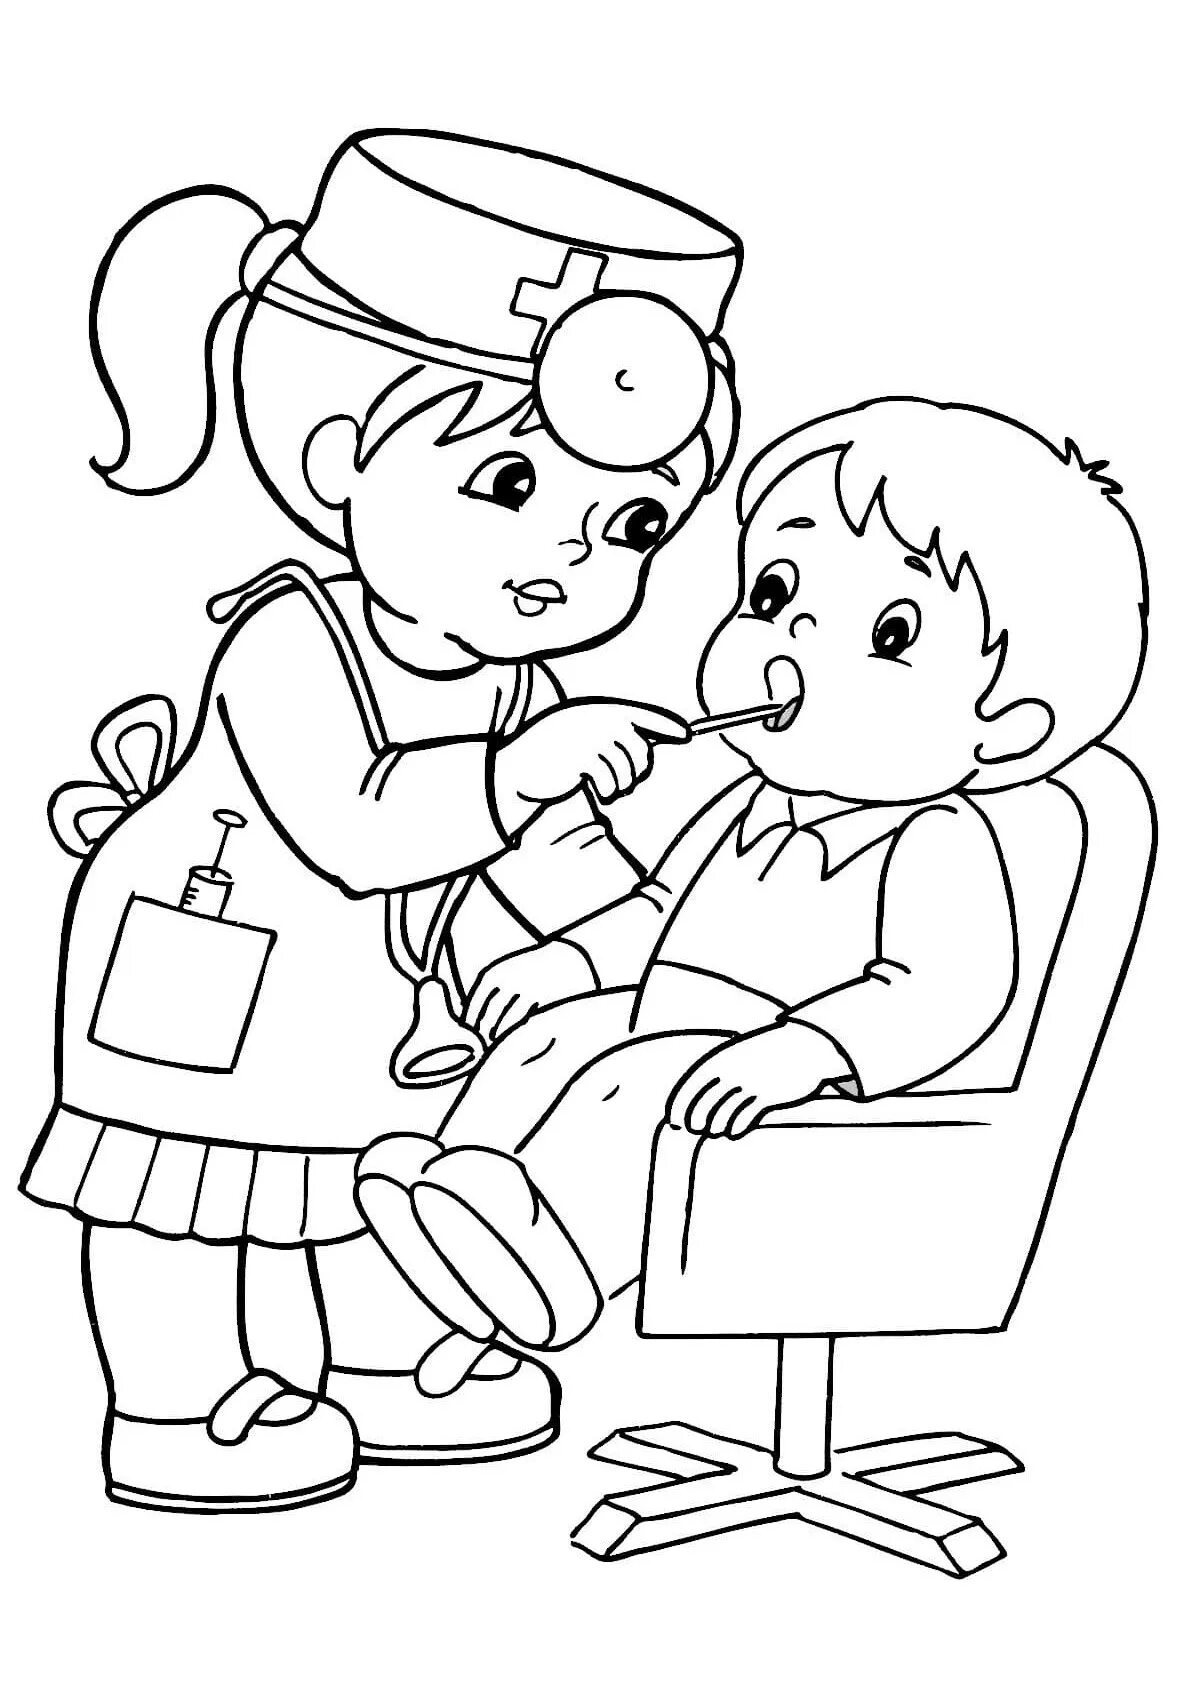 Glamorous farmer coloring page